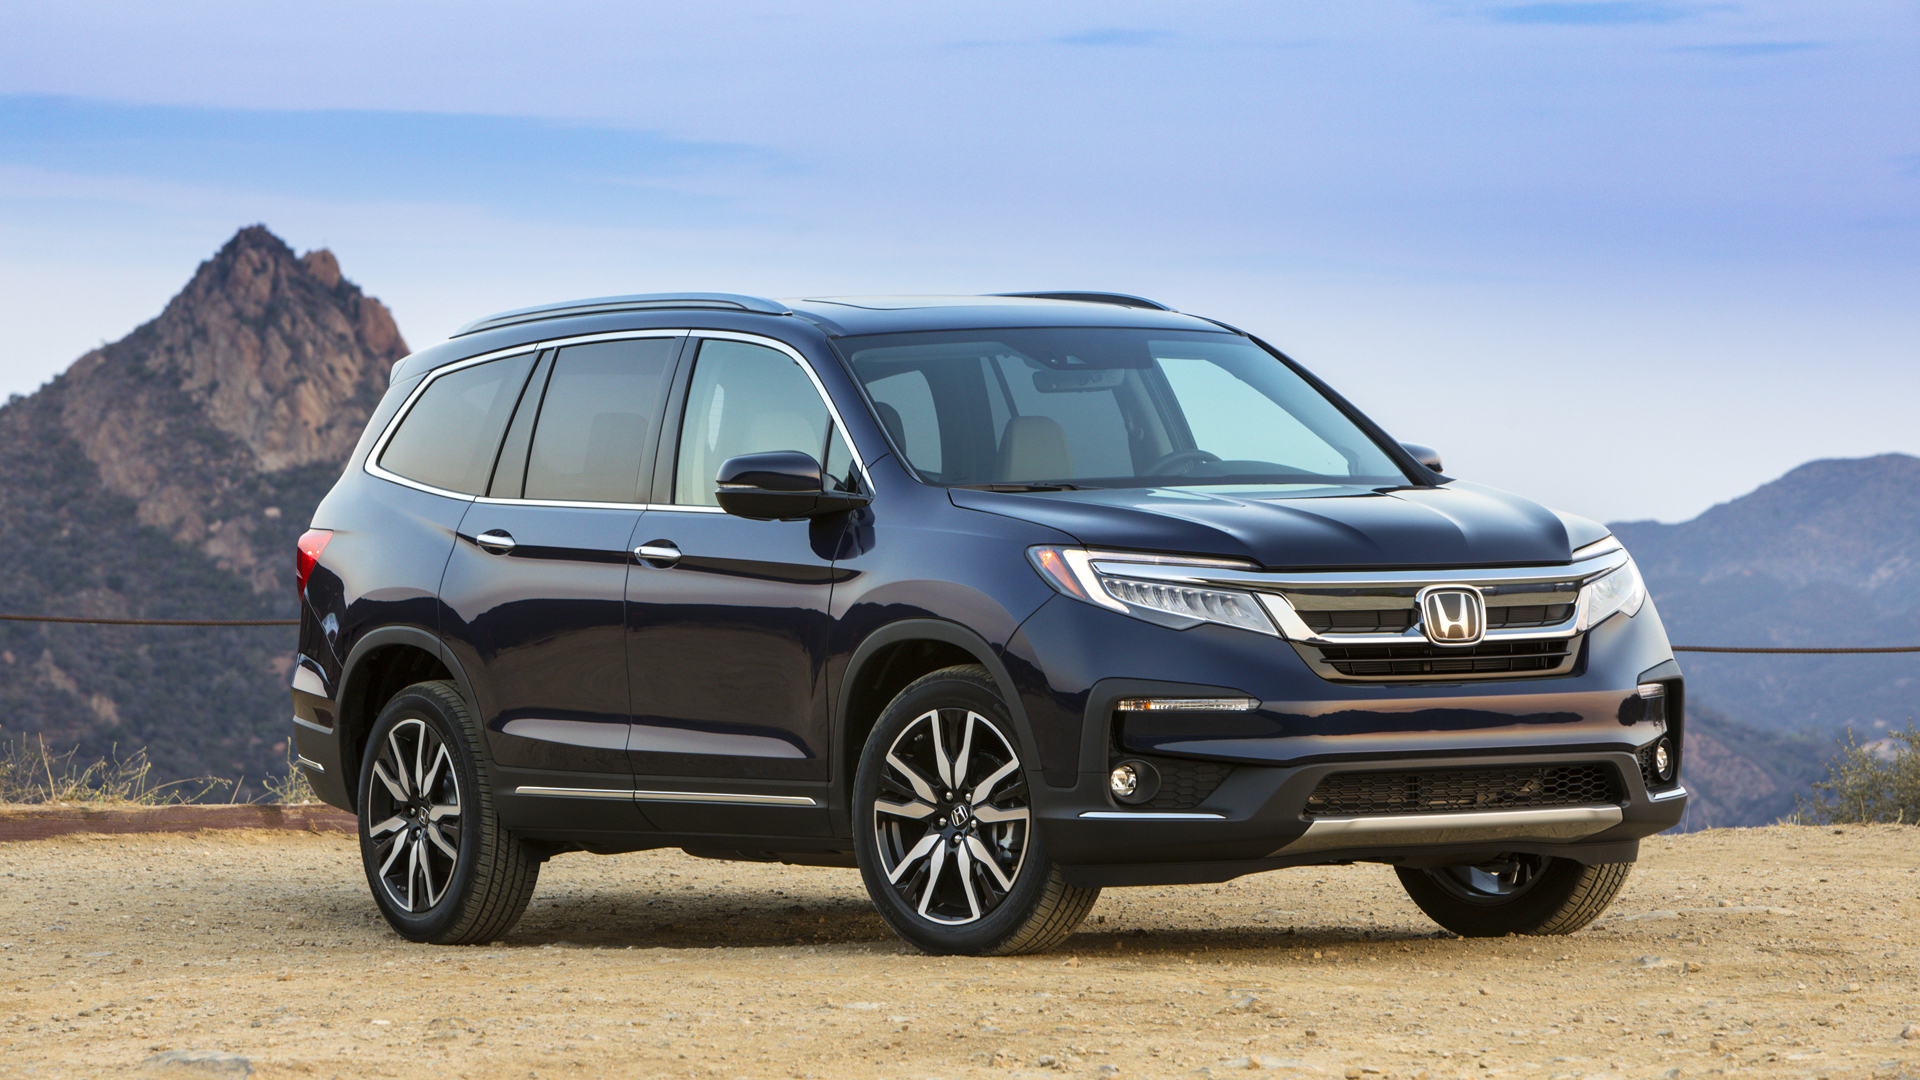 2020-honda-cr-v-ex-4dr-all-wheel-drive-specs-and-prices-autoblog